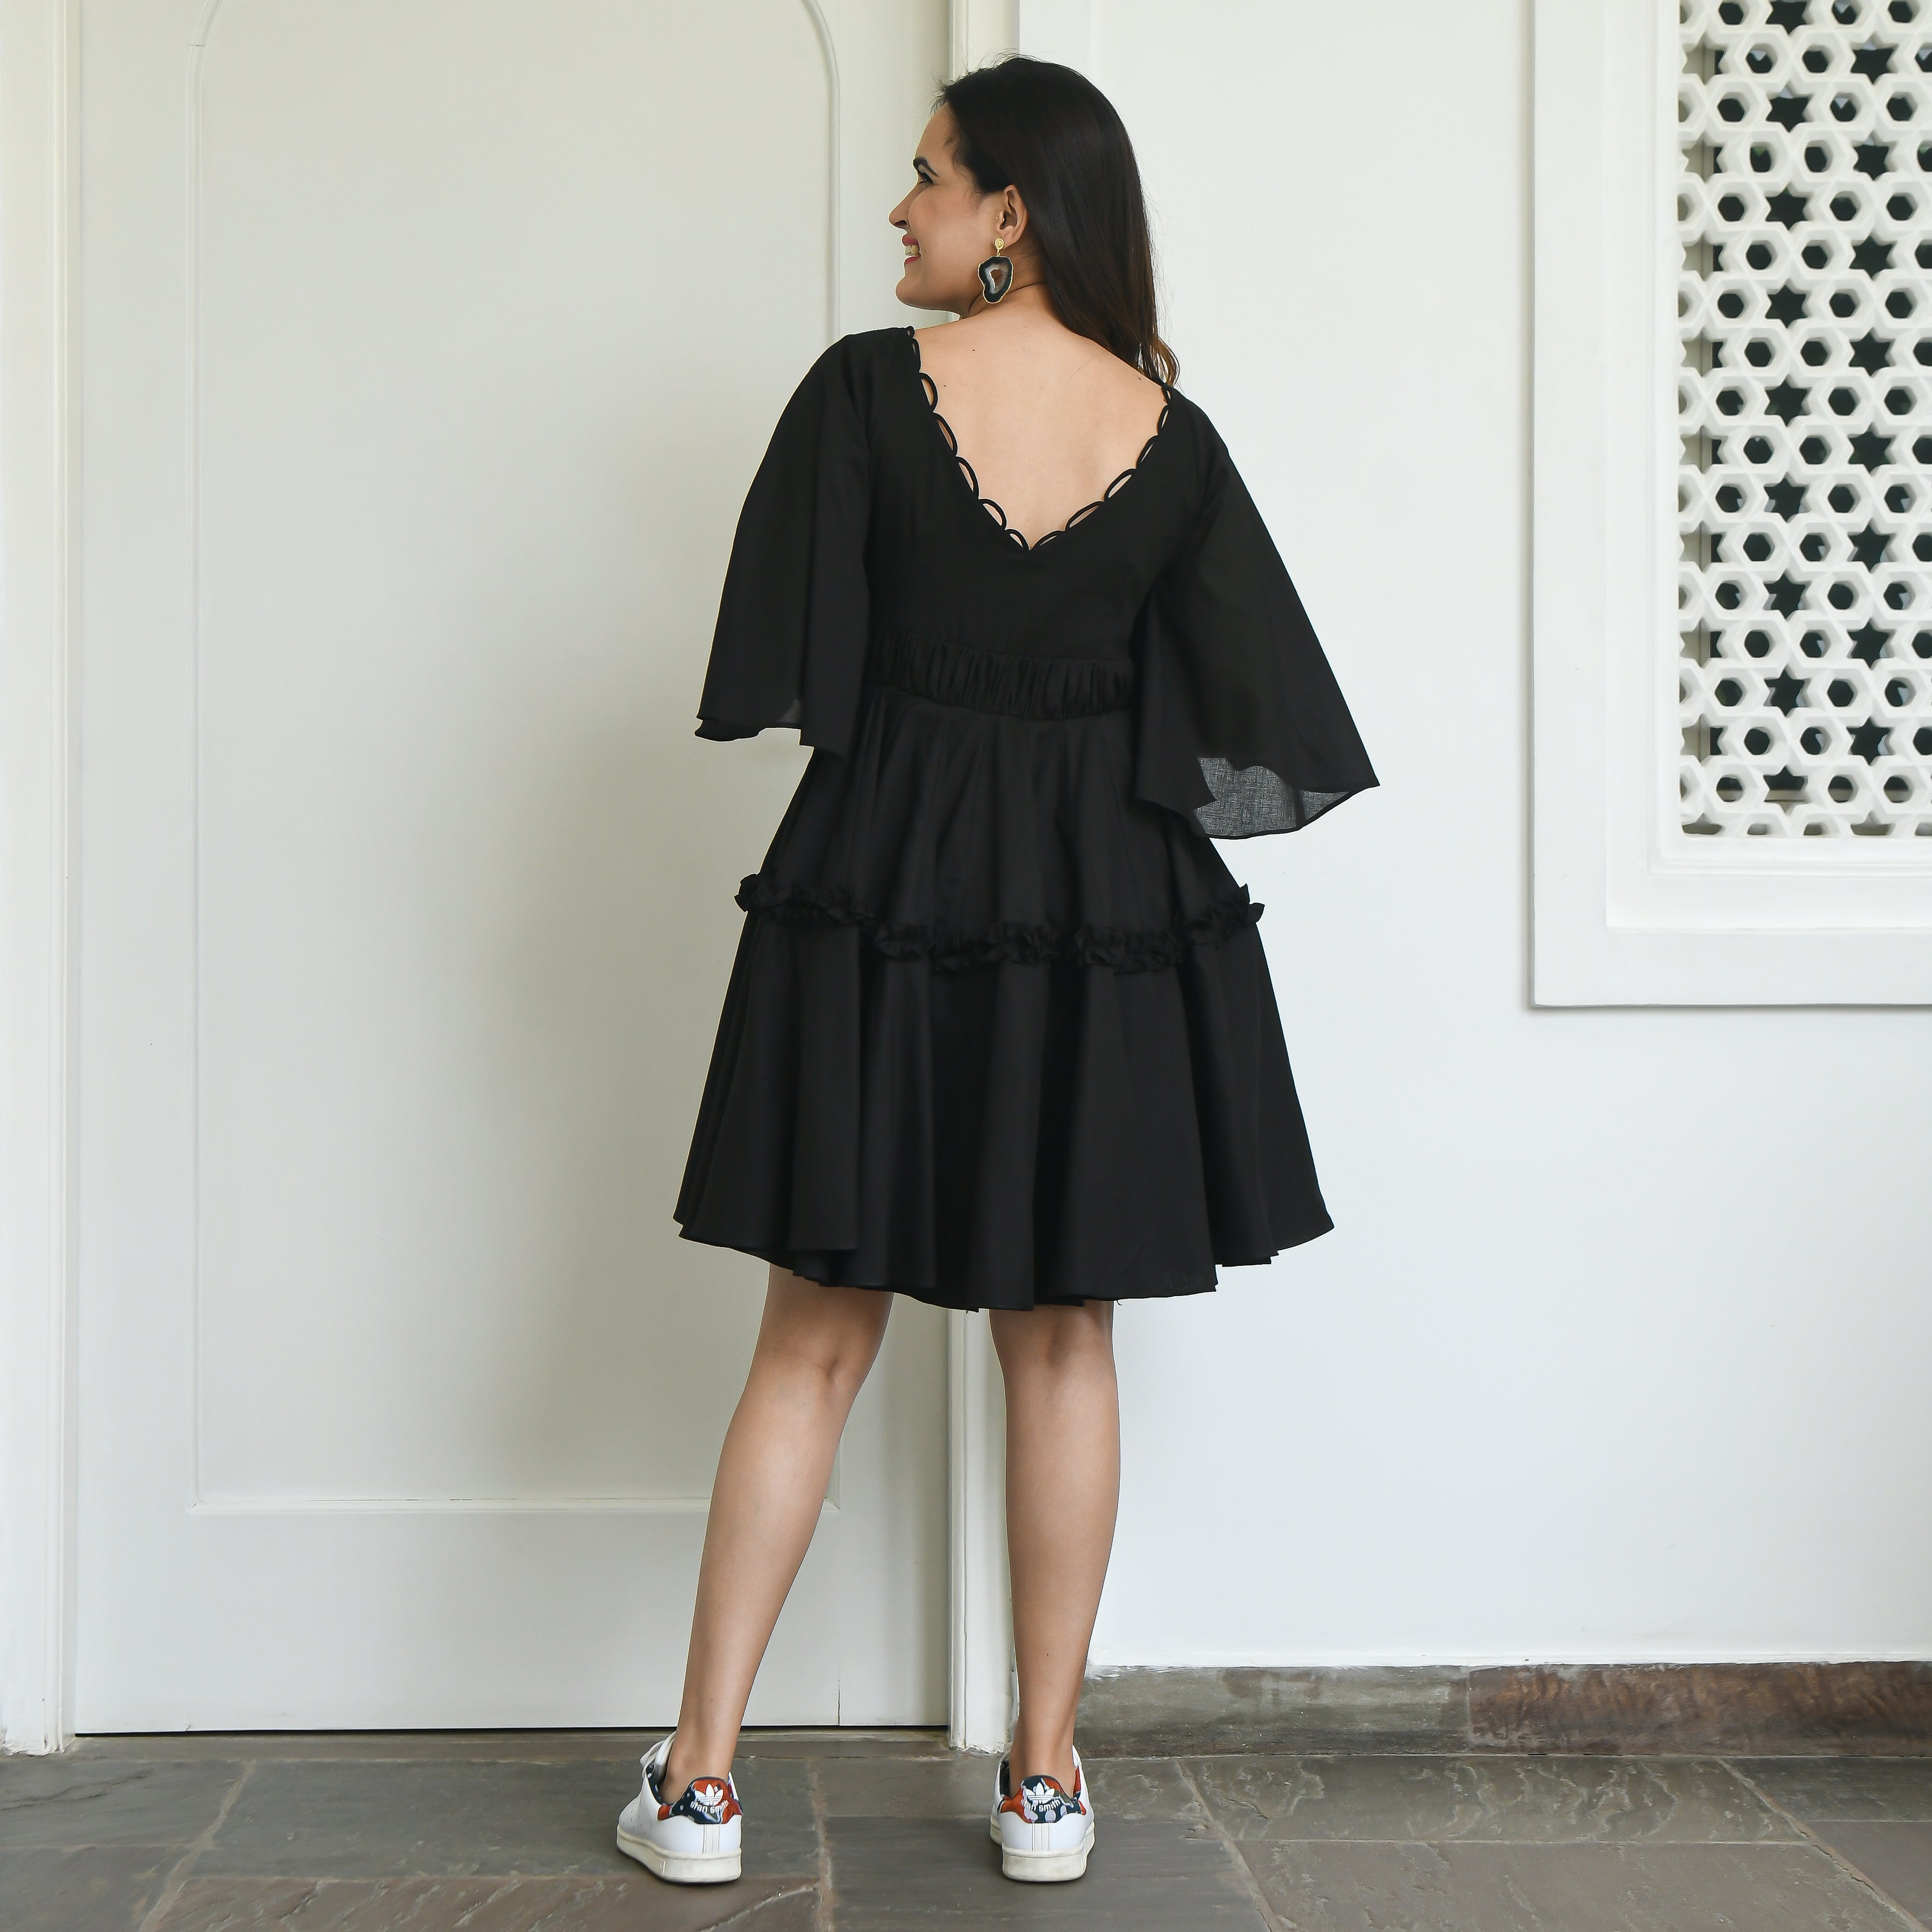 Black pleated and flared dress.